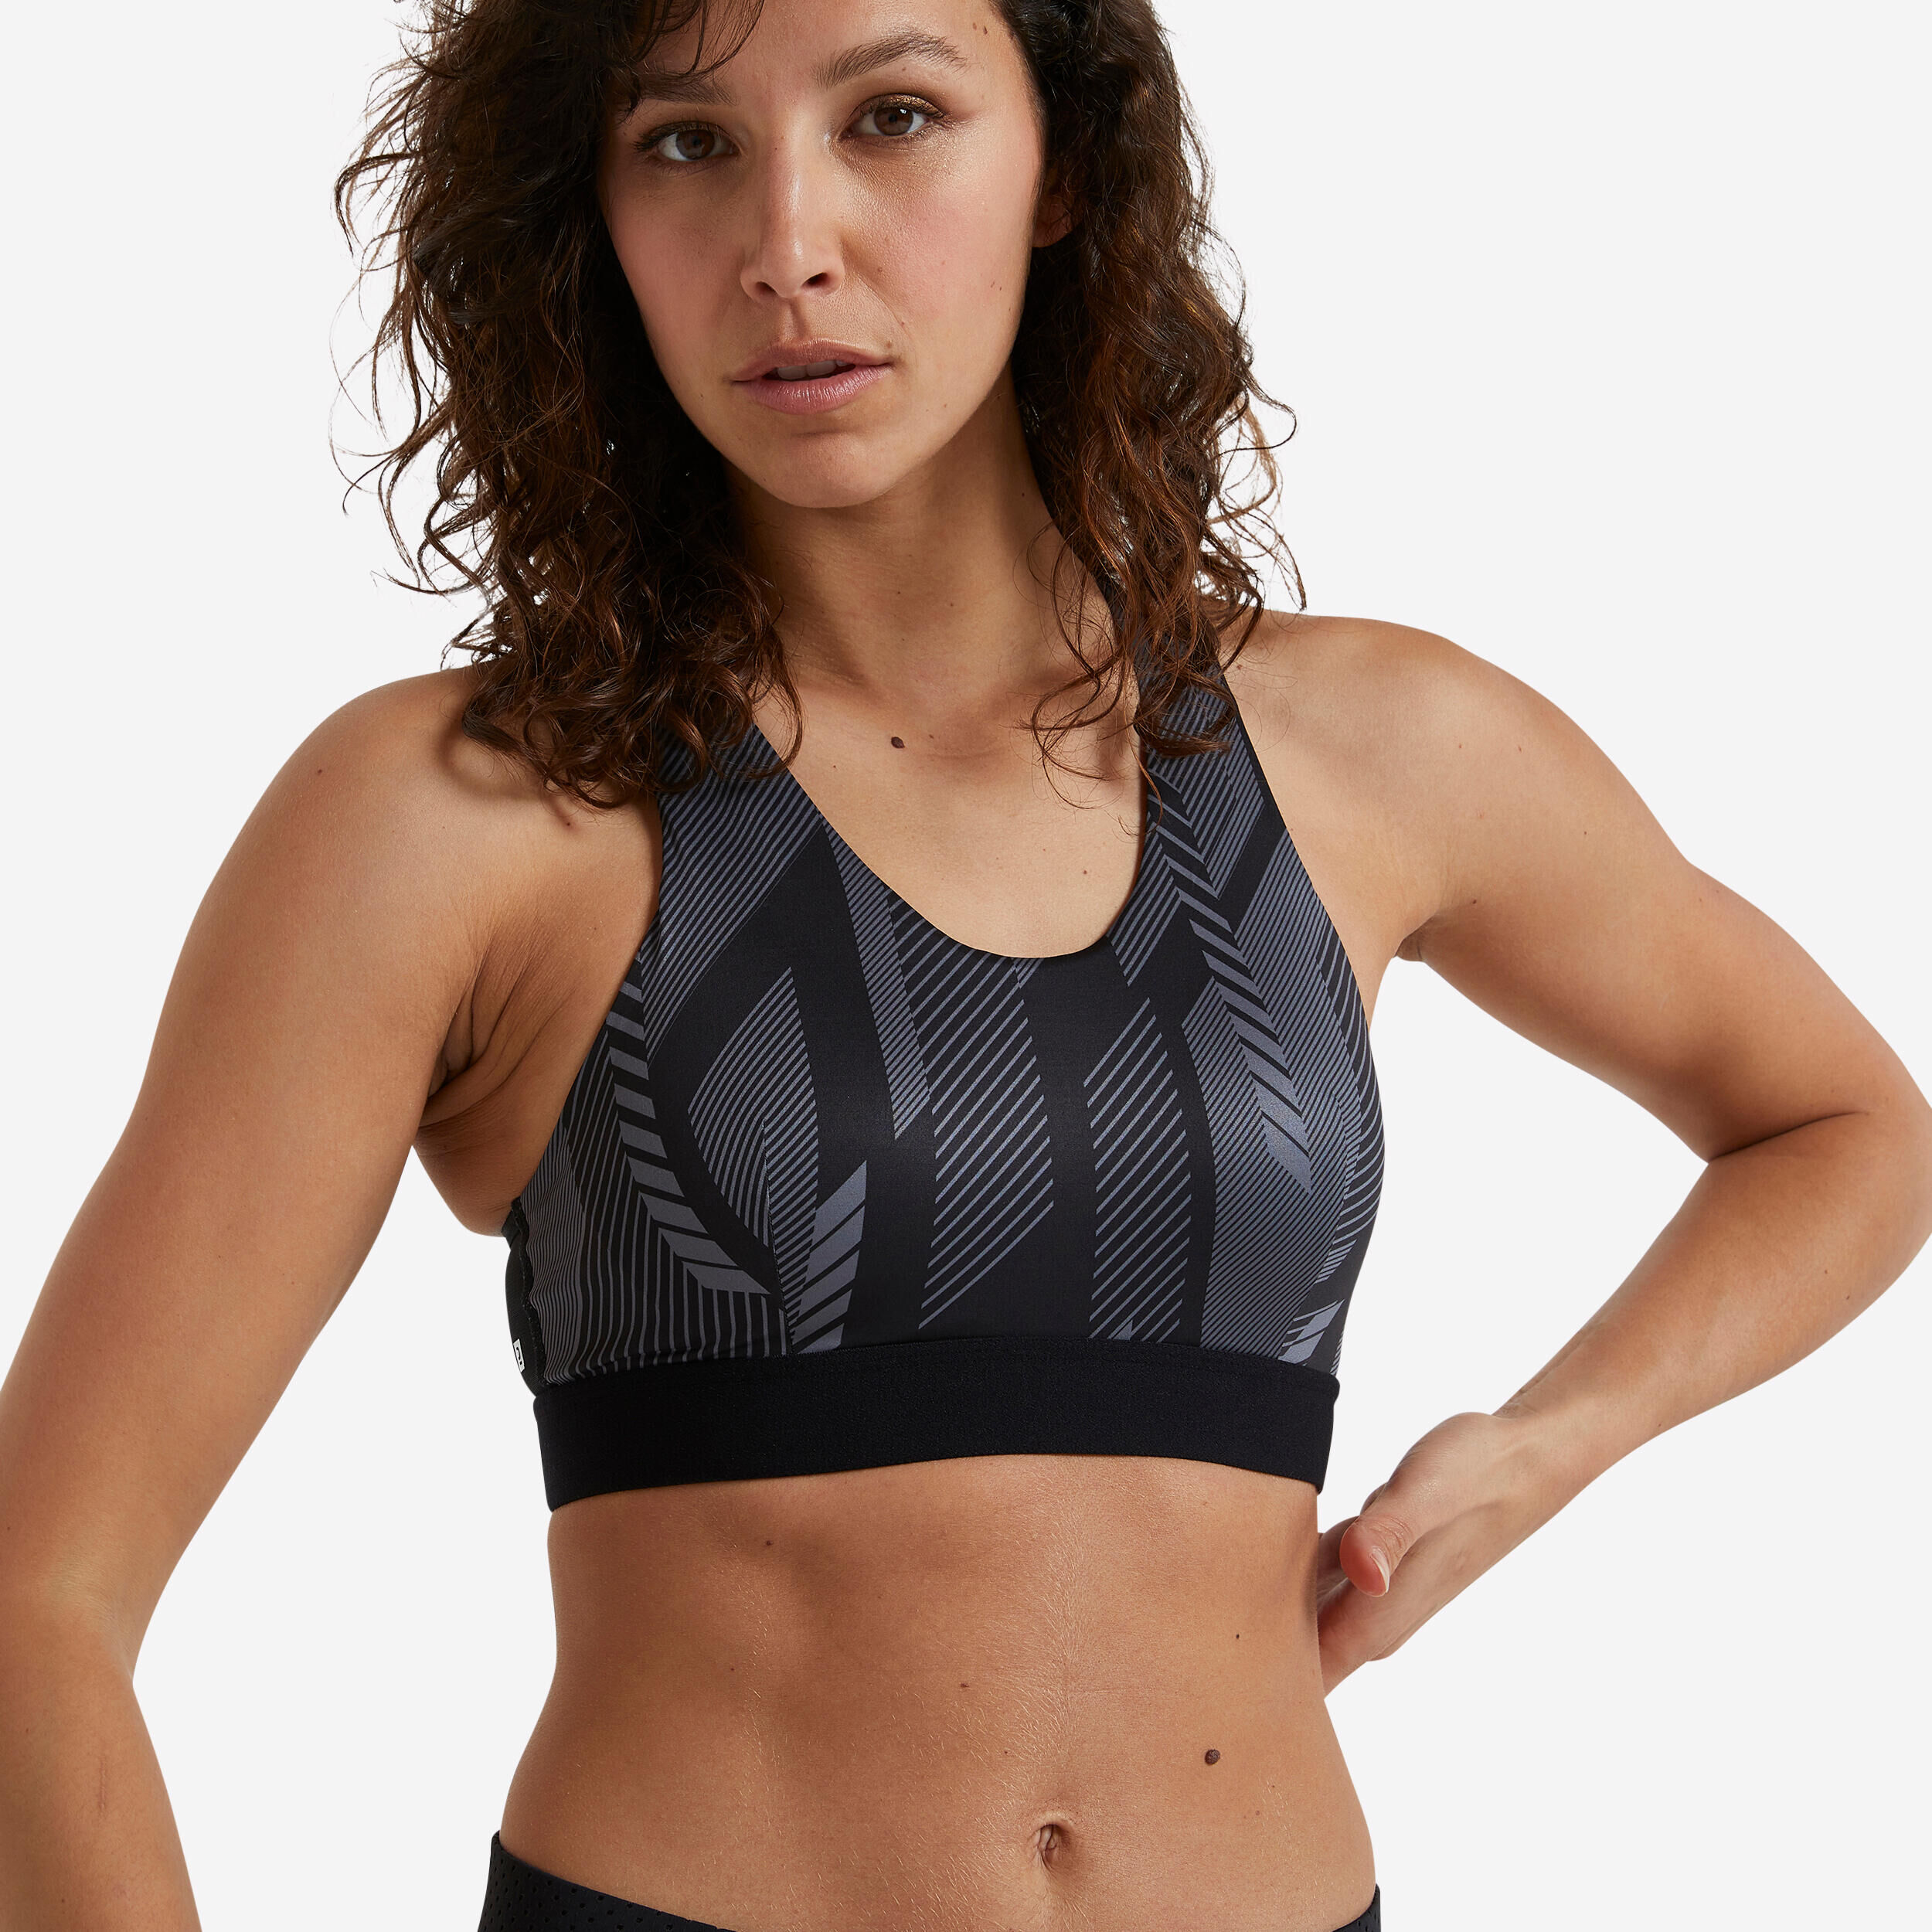 DOMYOS Women's Medium Support Racer Back Sports Bra with Cups - Black/Grey